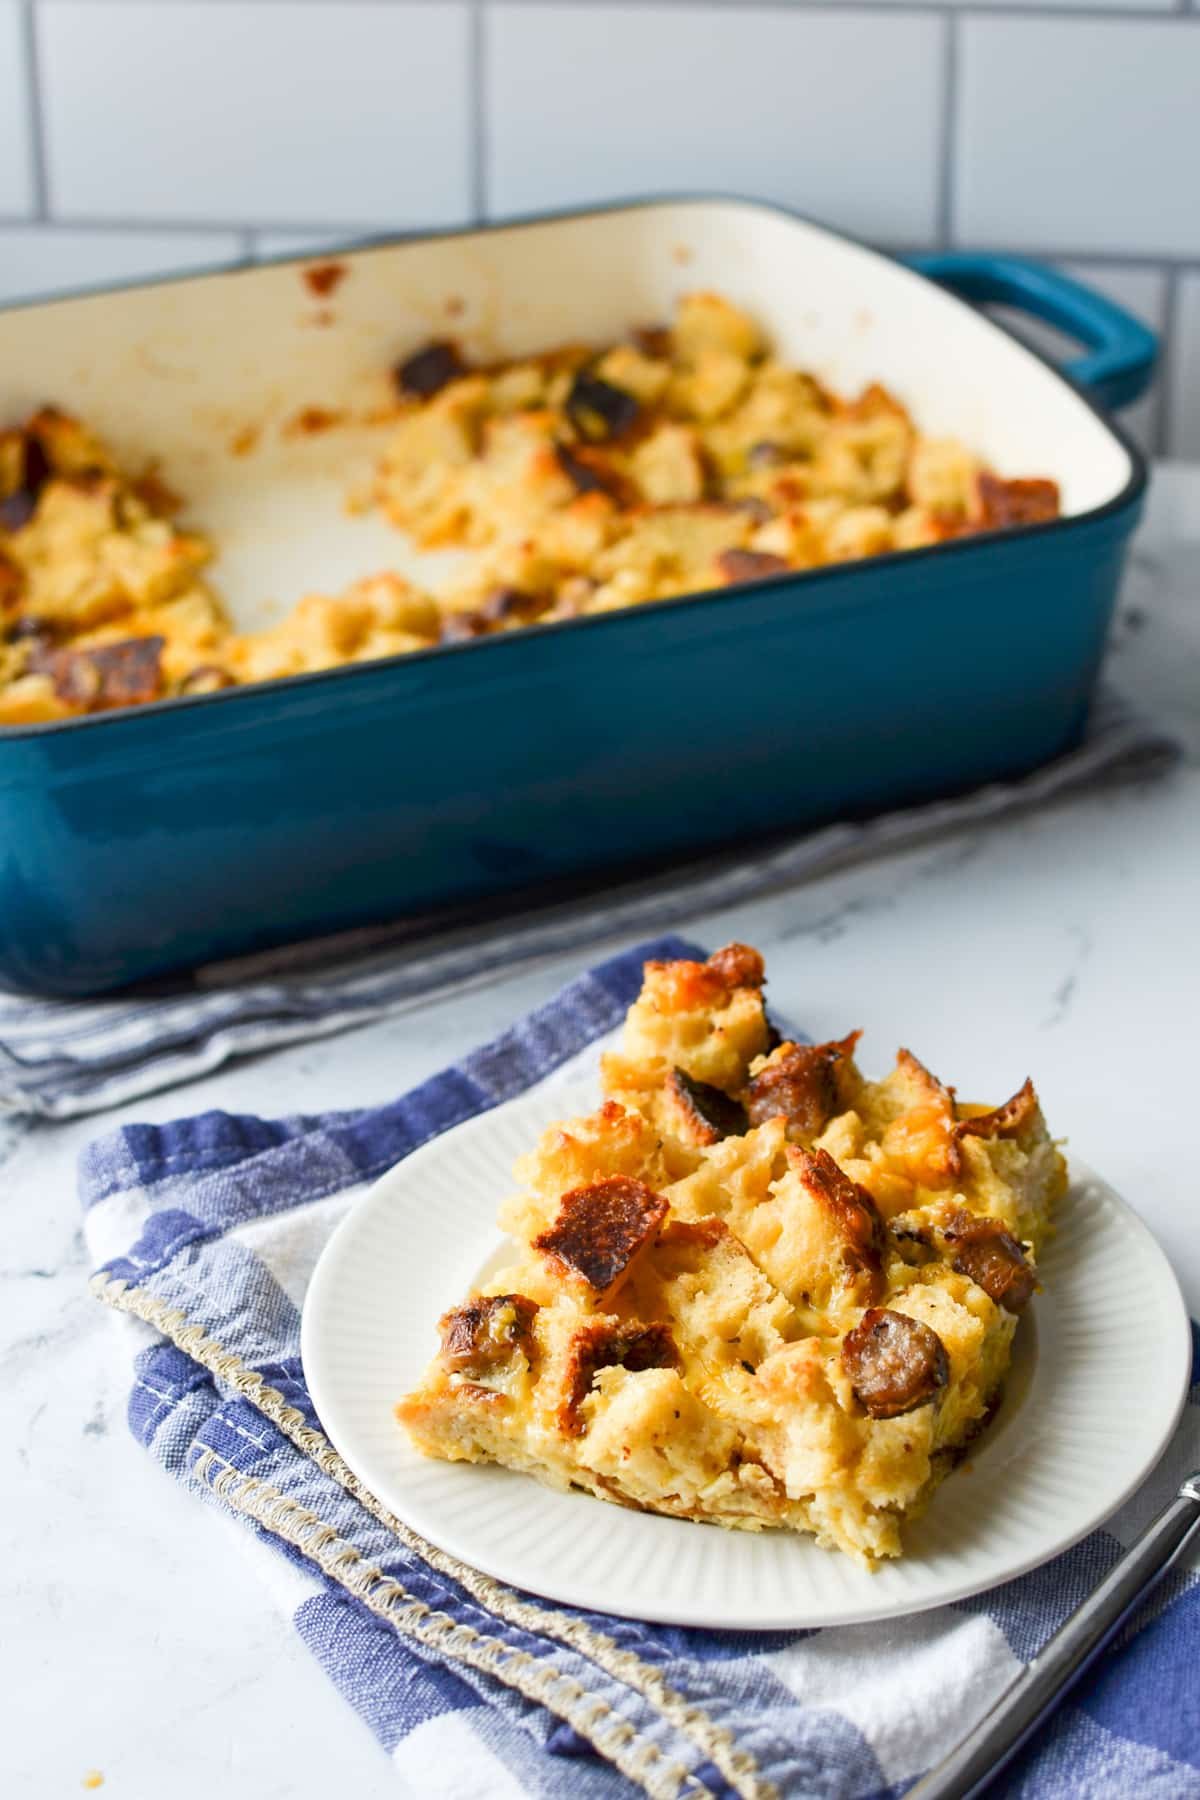 A slice of breakfast casserole with the baking dish in the background.